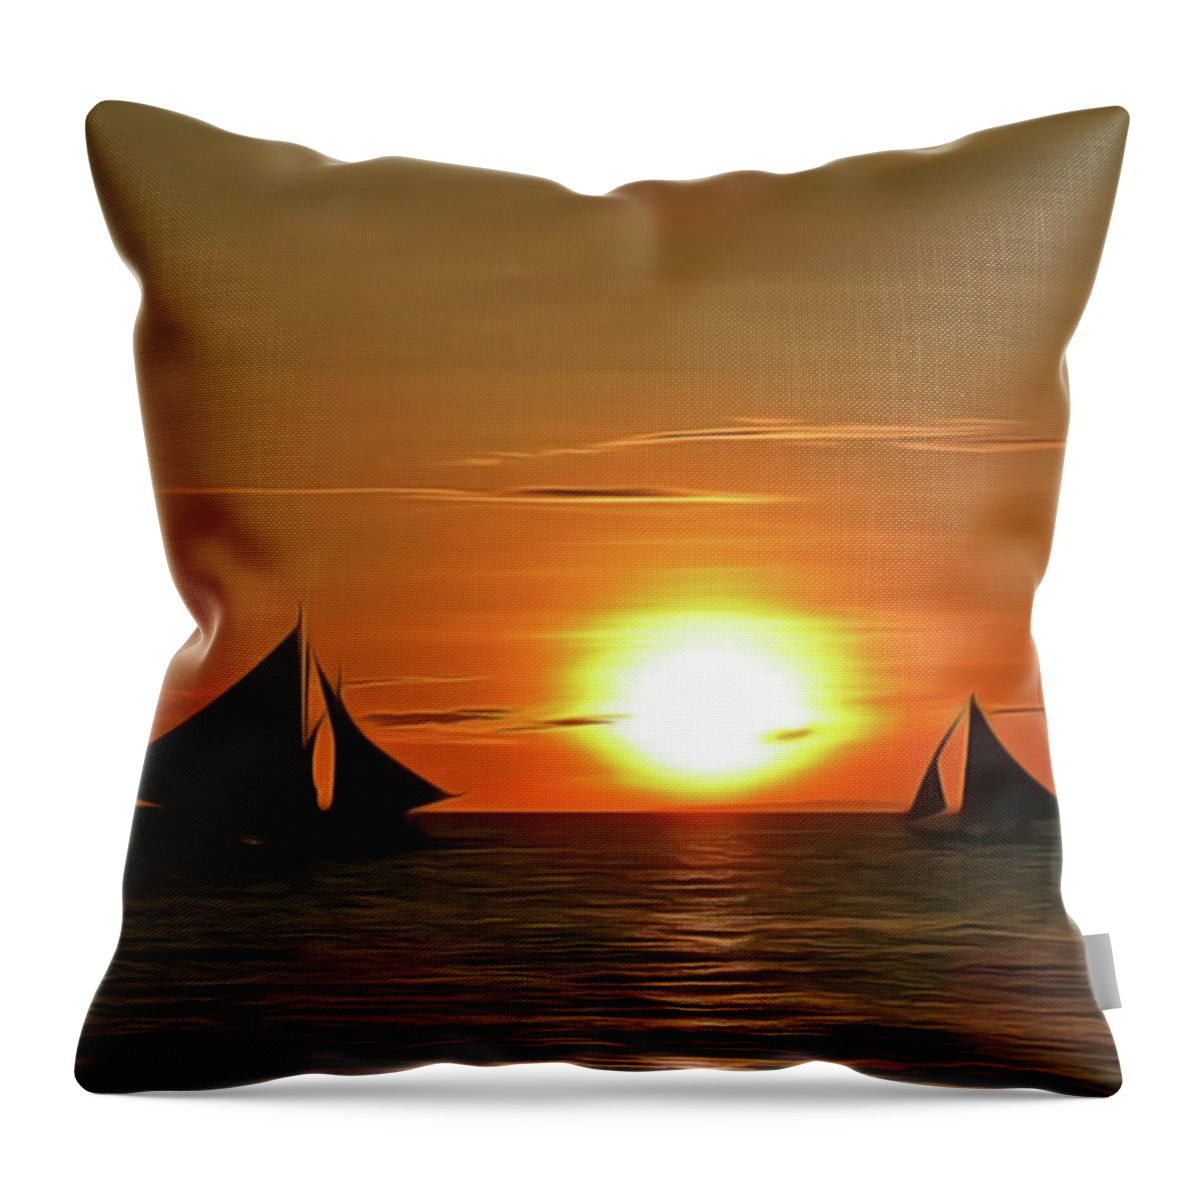 Night Sail Throw Pillow featuring the painting Night Sail by Harry Warrick